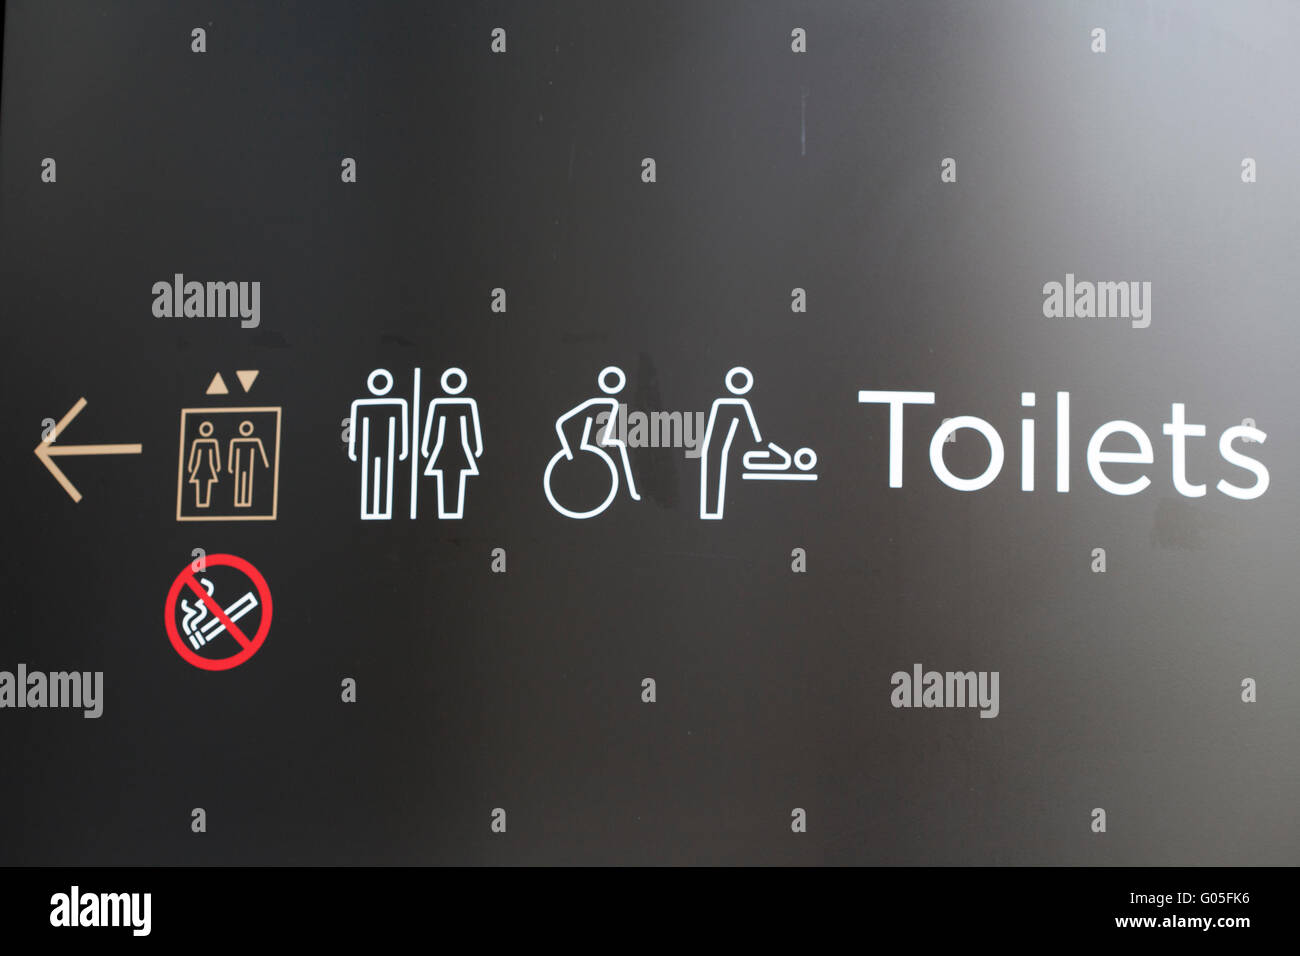 Wayfinding direction sign - Toilets, Lifts, Baby Changing & Accessible Toilets Stock Photo